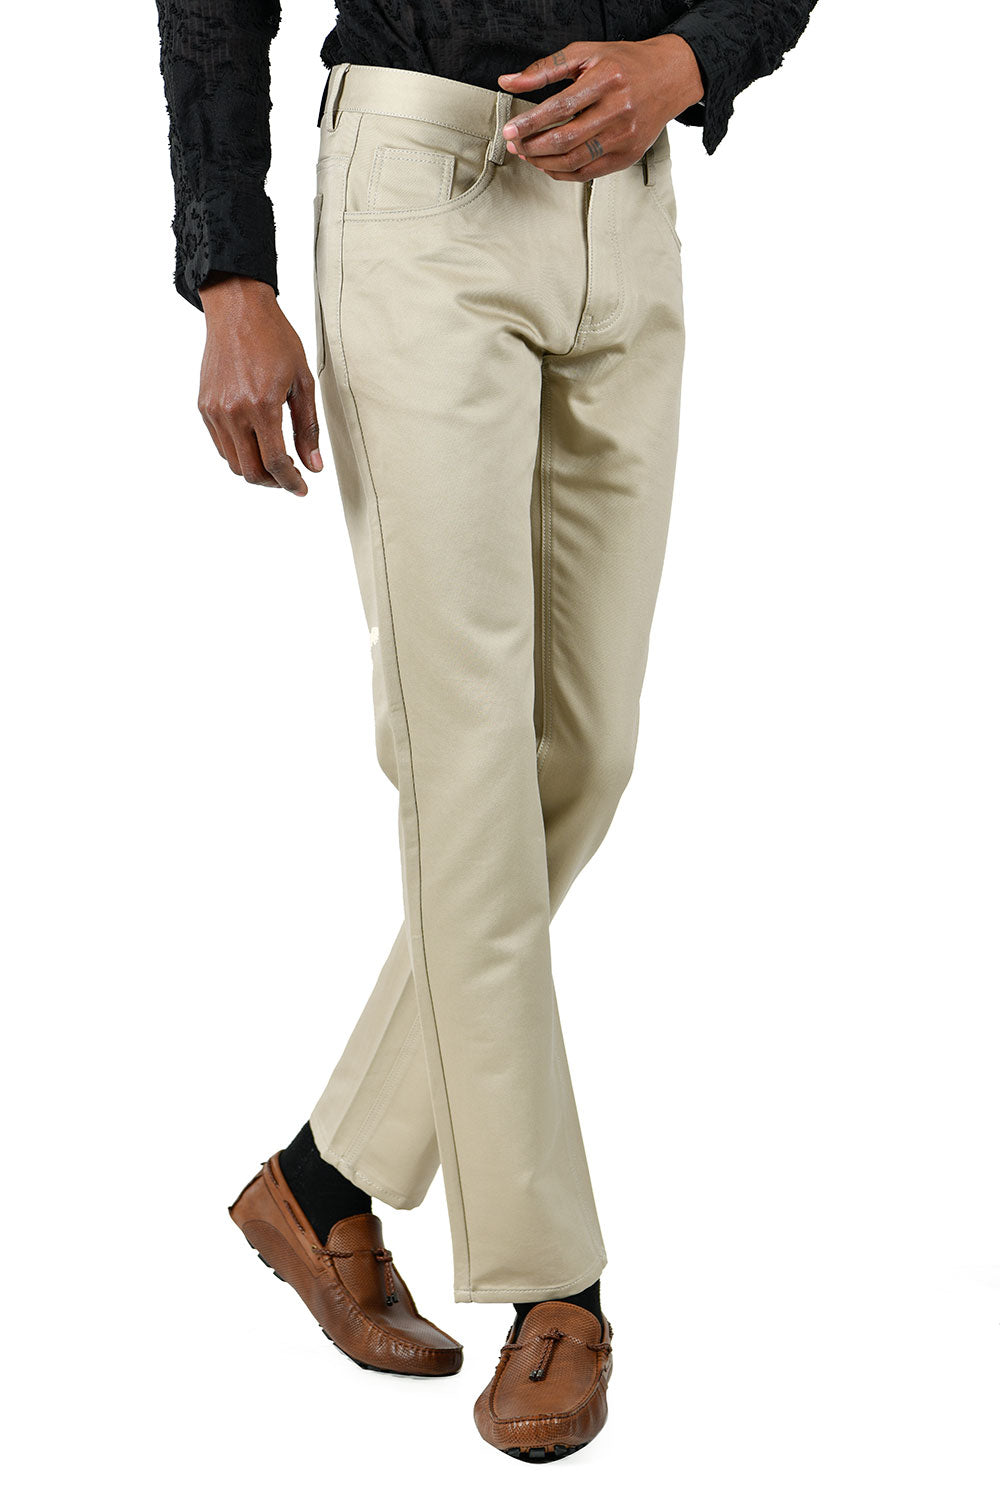 Barabas Men's Solid Color Zip and cream Straight Fit Pants B2060